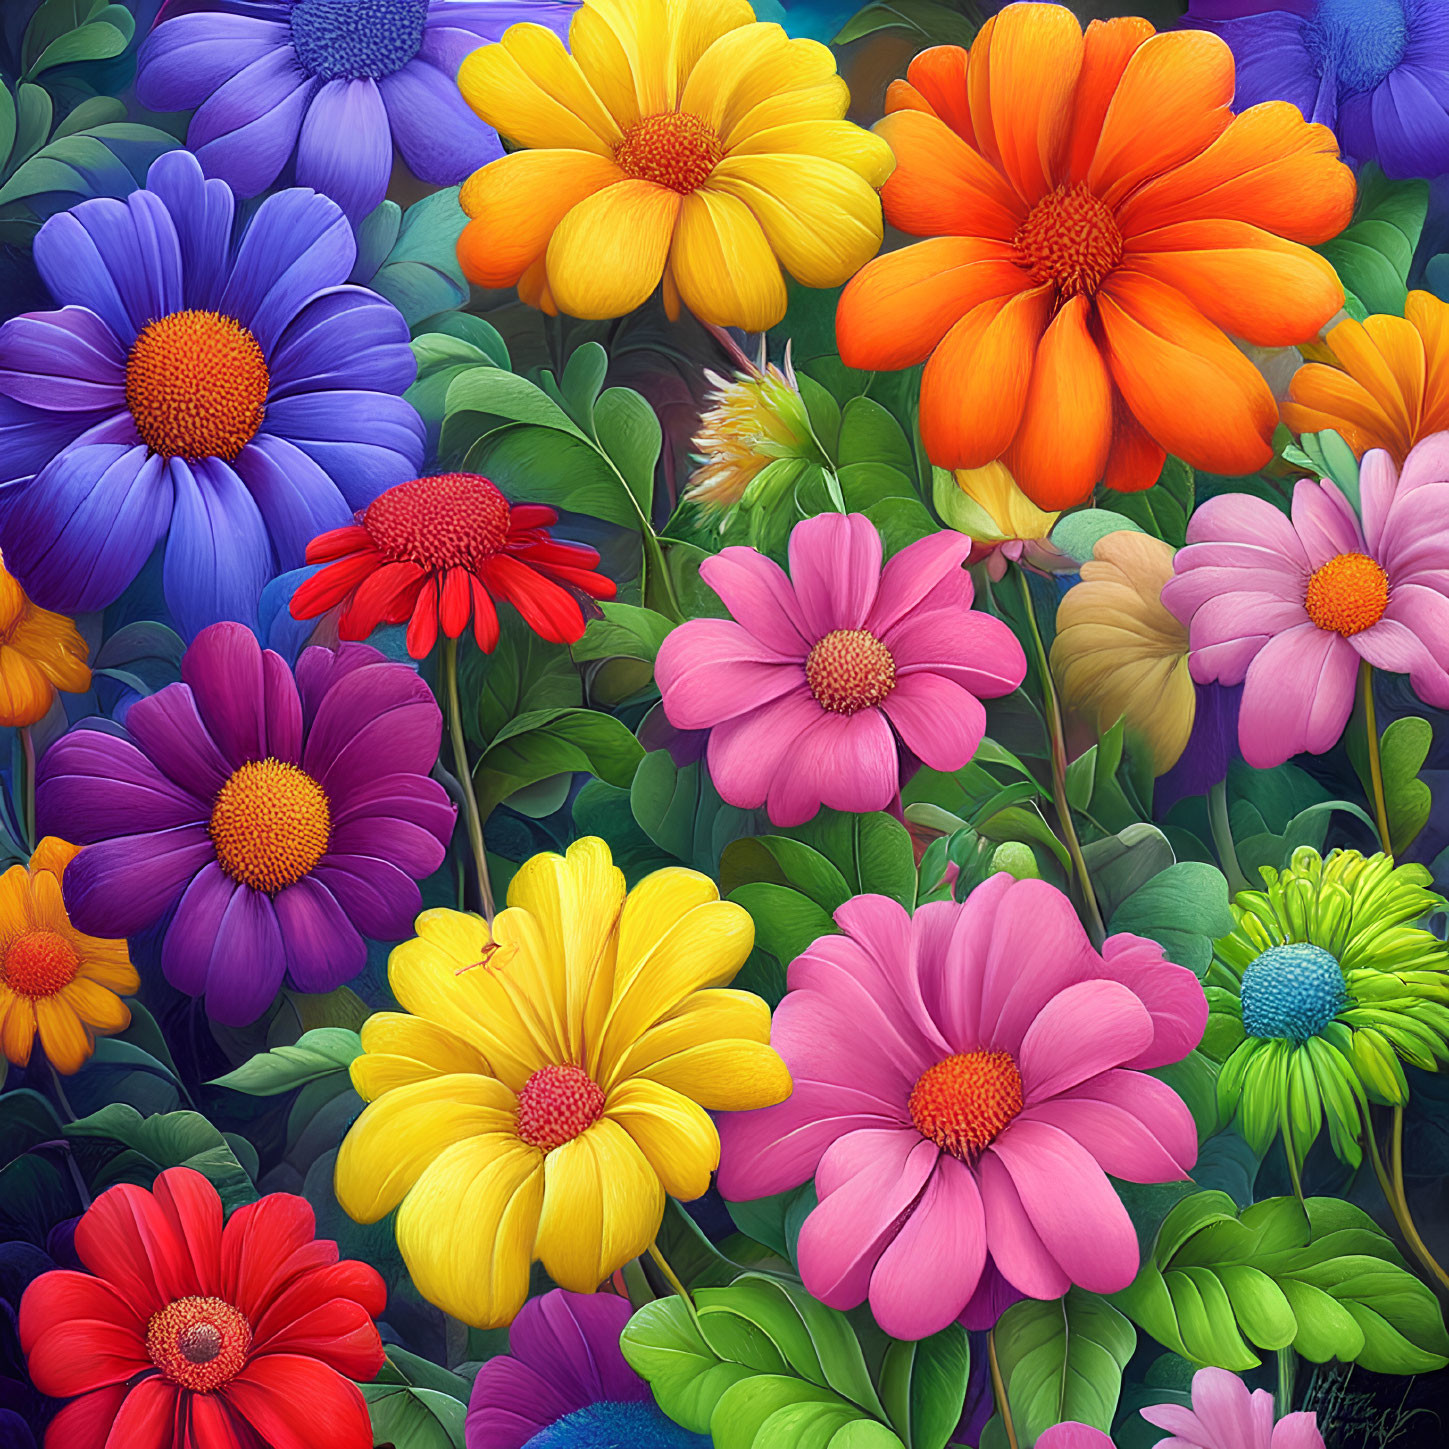 Colorful Array of Purple, Yellow, Orange, Red, and Pink Flowers with Lush Green Leaves